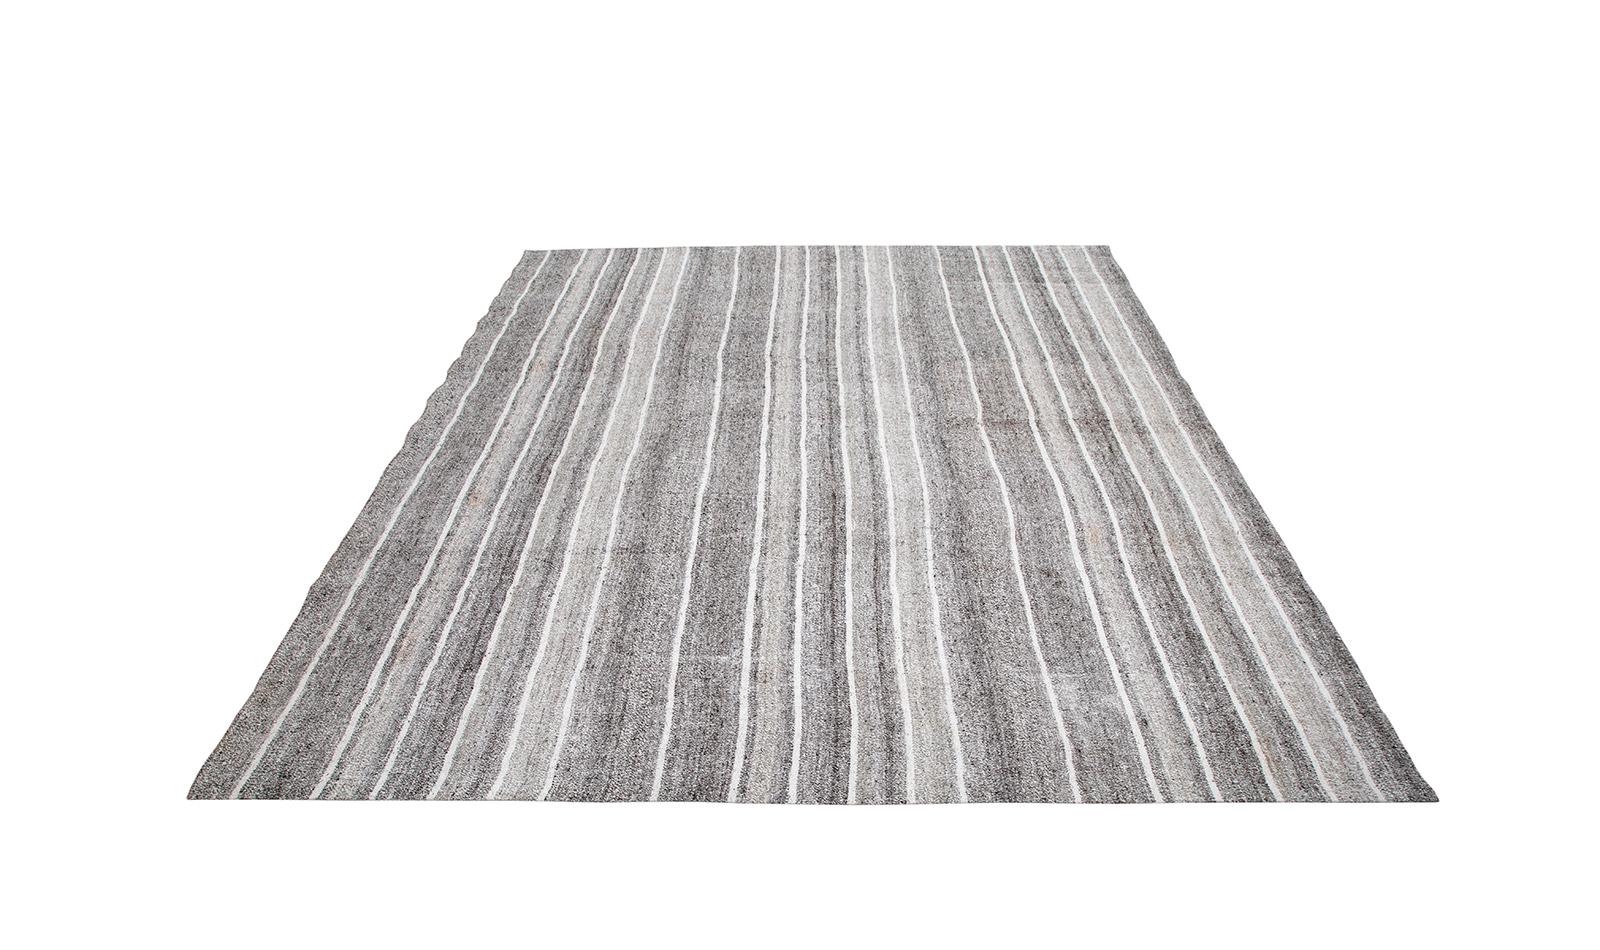 Hand-Woven Vintage Mid-Century Modern Flat-Weave Rug in Grey Tones For Sale